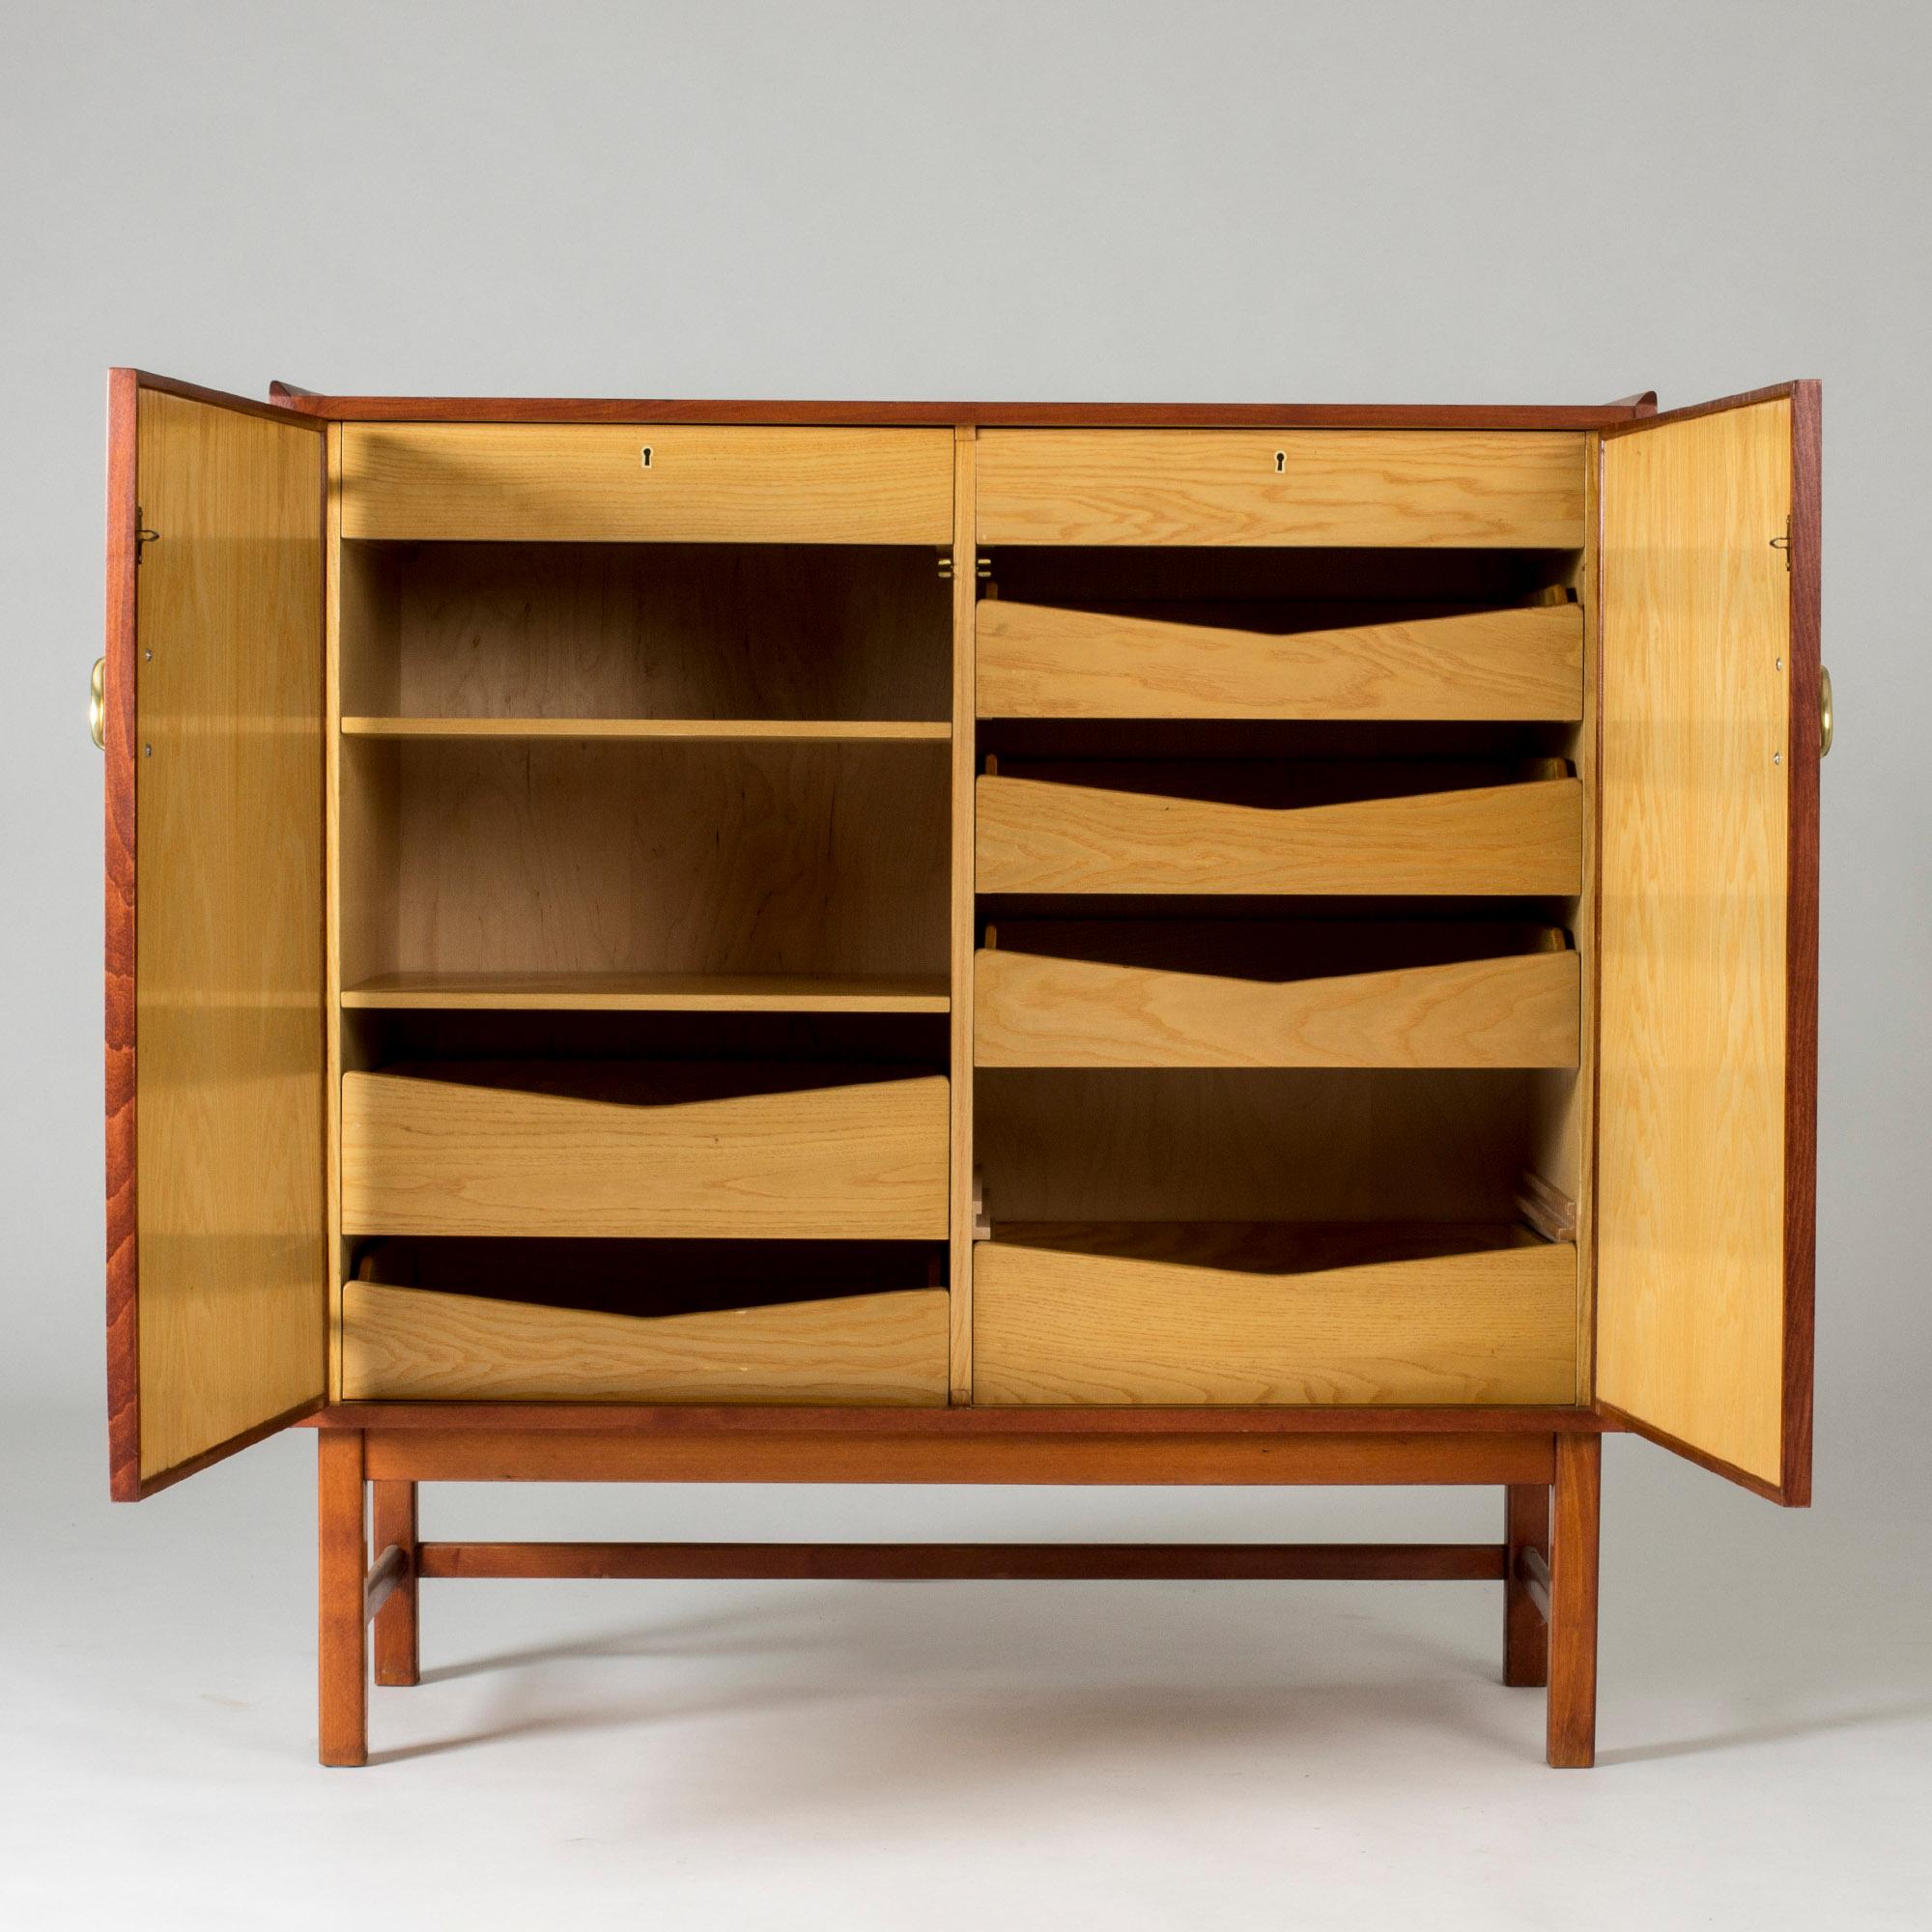 Swedish Mahogany, Brass and Rattan Cabinet from Westbergs Möbler, Sweden, 1950s